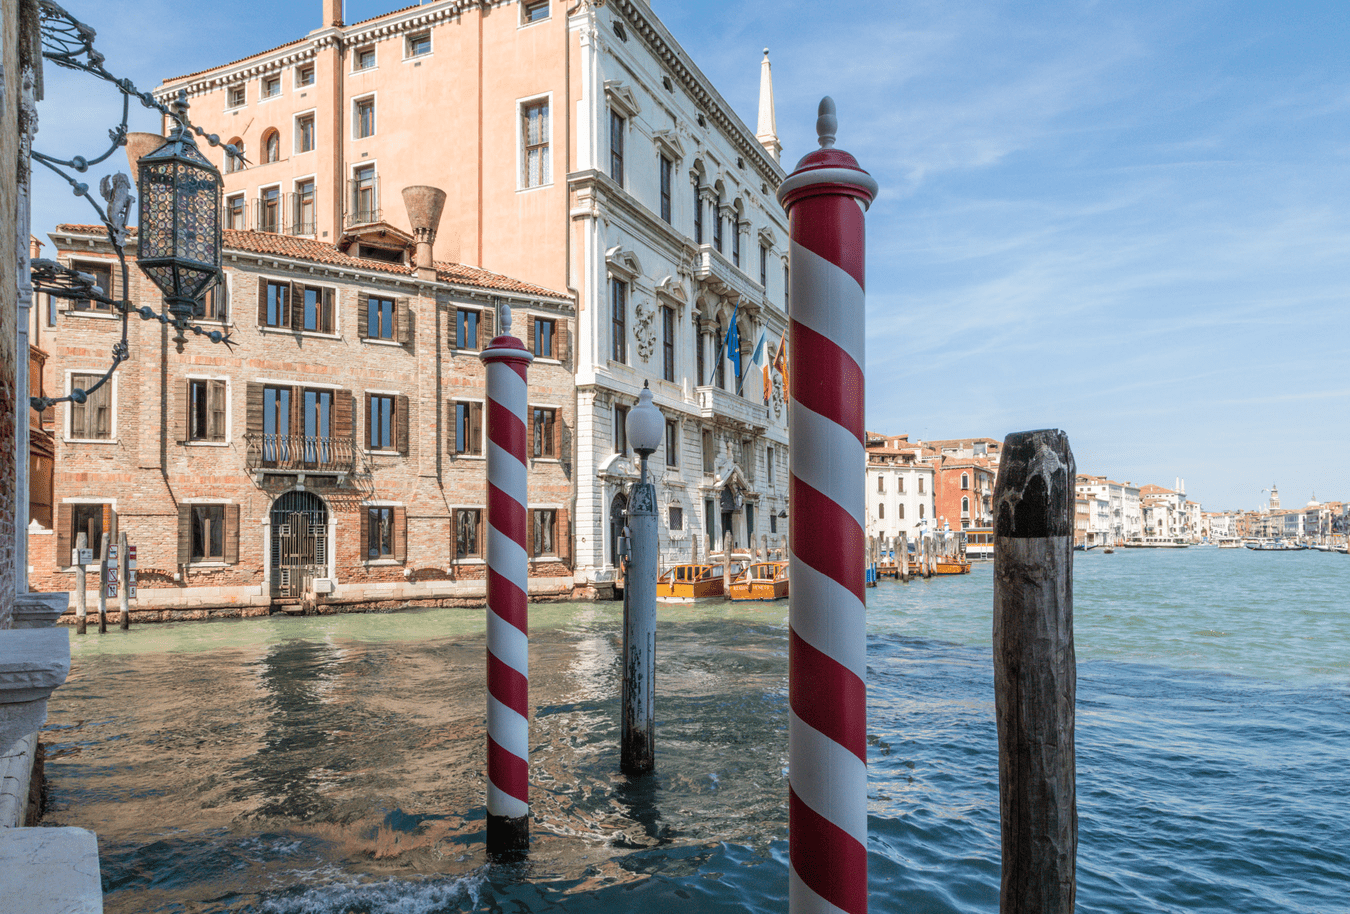 Palazzina Masieri from the Grand Canal. Photo by: ©John Volpato